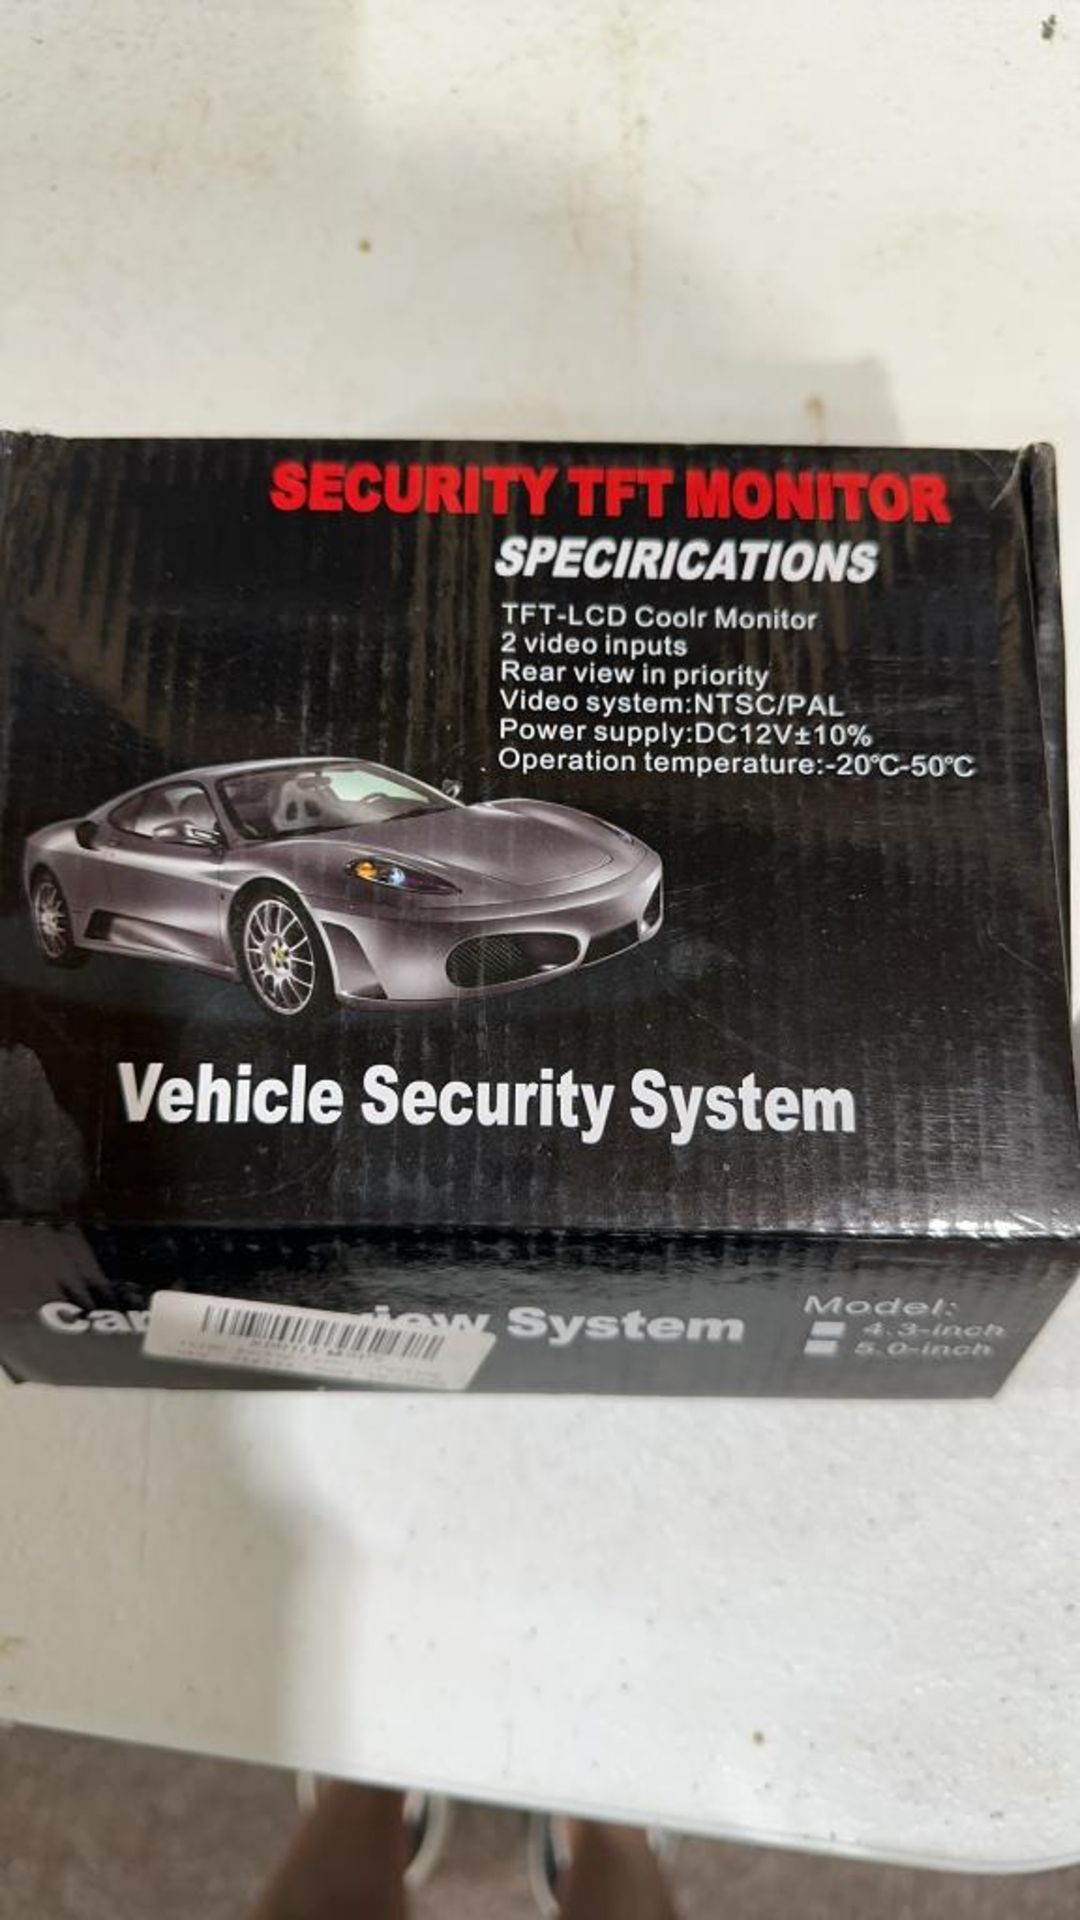 Vehicle security system - Image 2 of 6